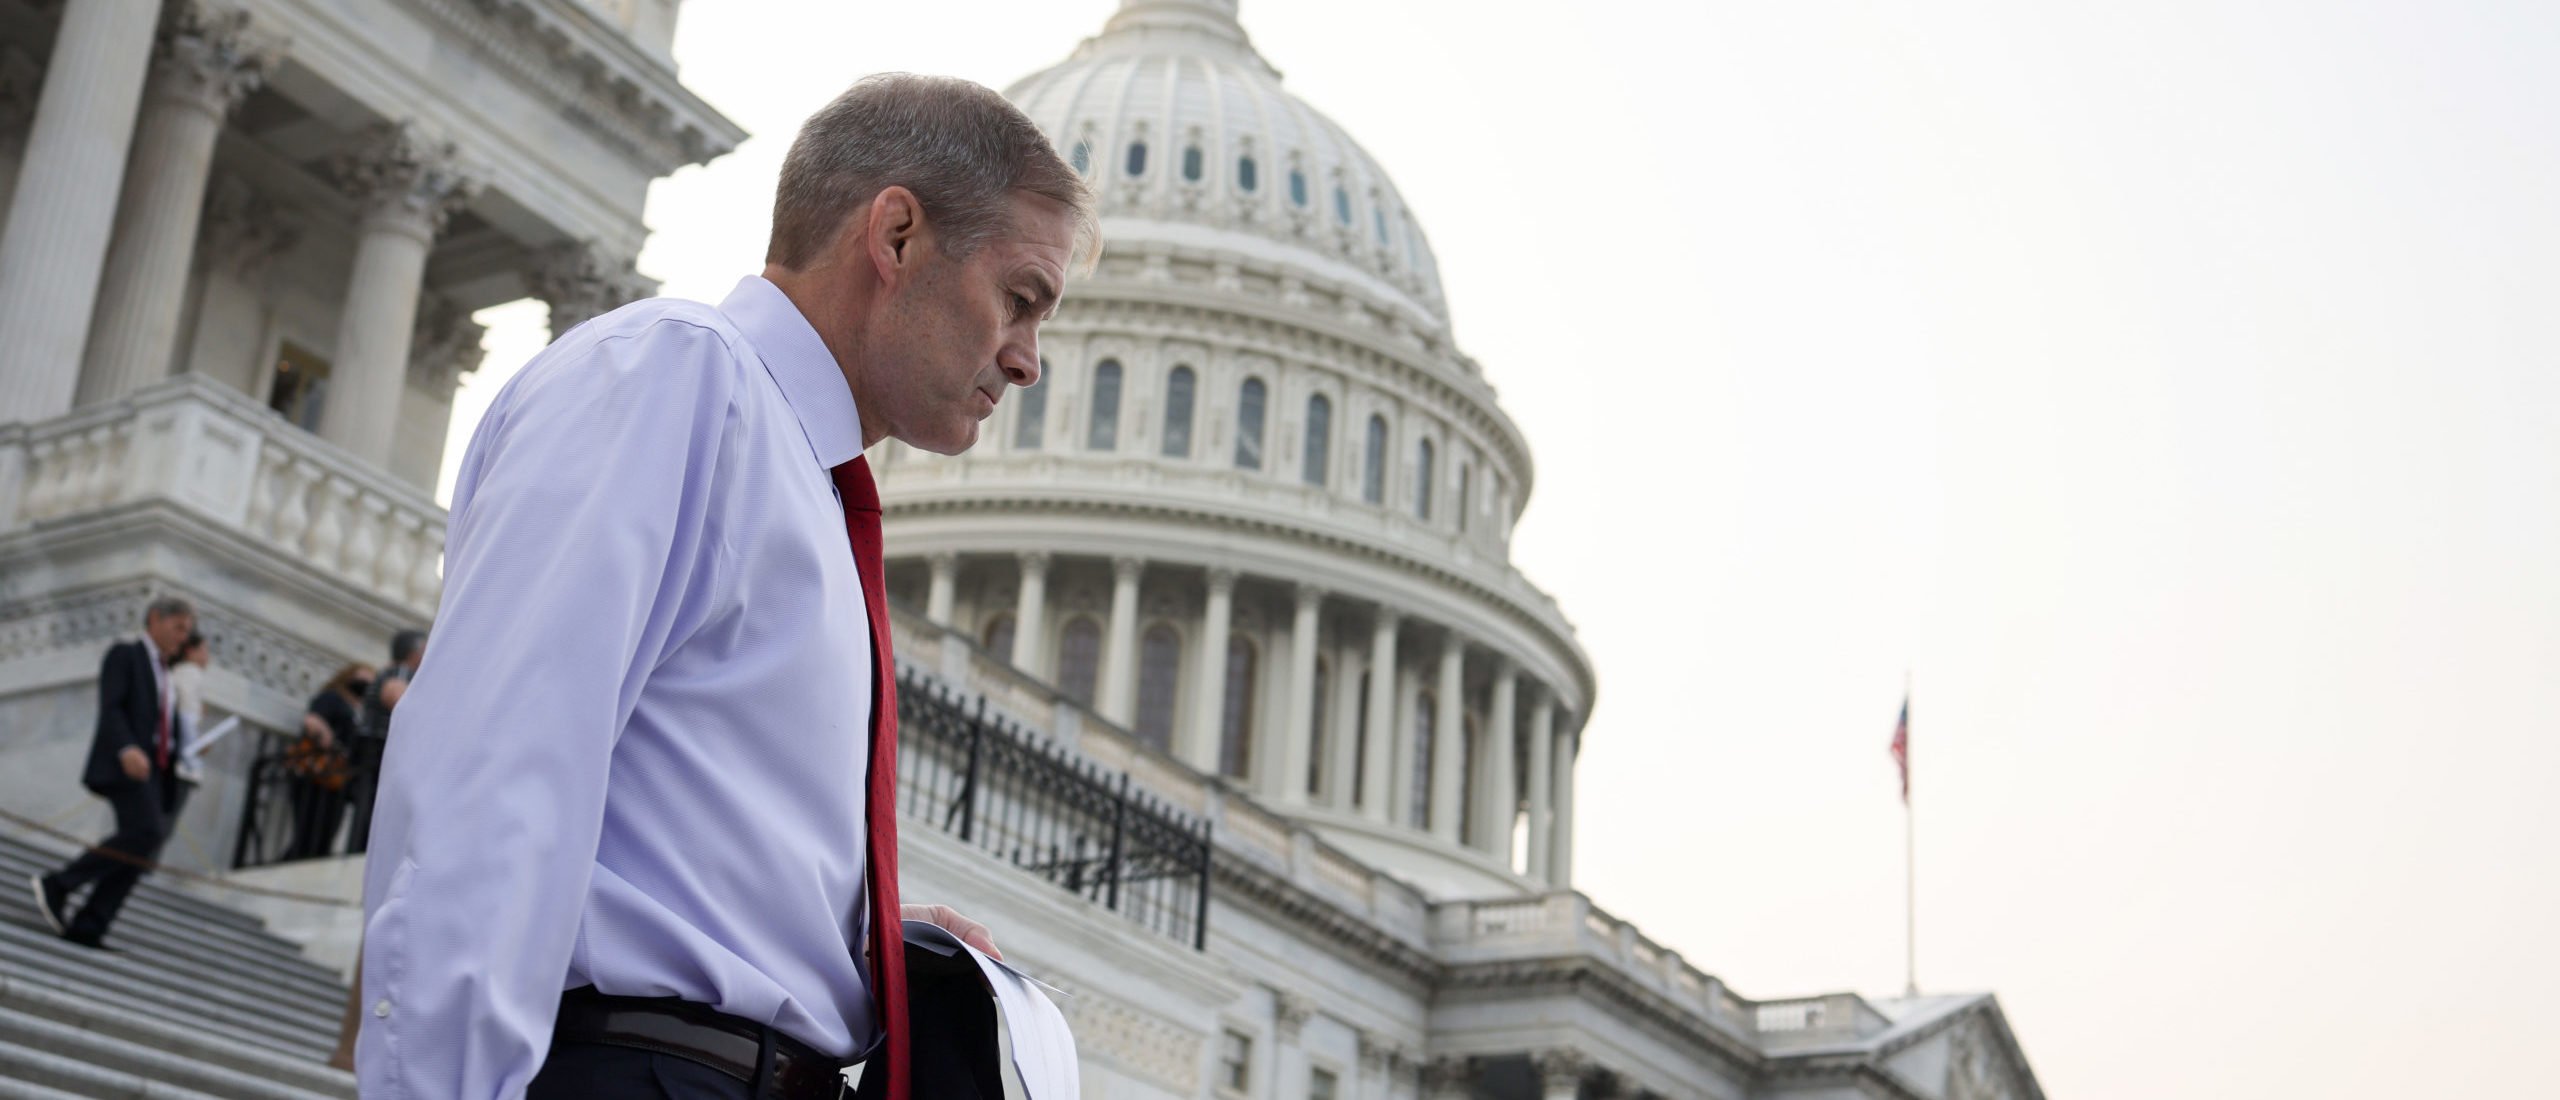 WASHINGTON, DC - JULY 19: Rep. Jim Jordan (R-OH) speaks to reporters as he leaves the U.S. Capitol Building on July 19, 2021 in Washington, DC. Jordan, along with four other GOP members, was named by House Minority Leader Kevin McCarthy (R-CA) to serve on House panel investigating Jan. 6 riots. (Photo by Anna Moneymaker/Getty Images)